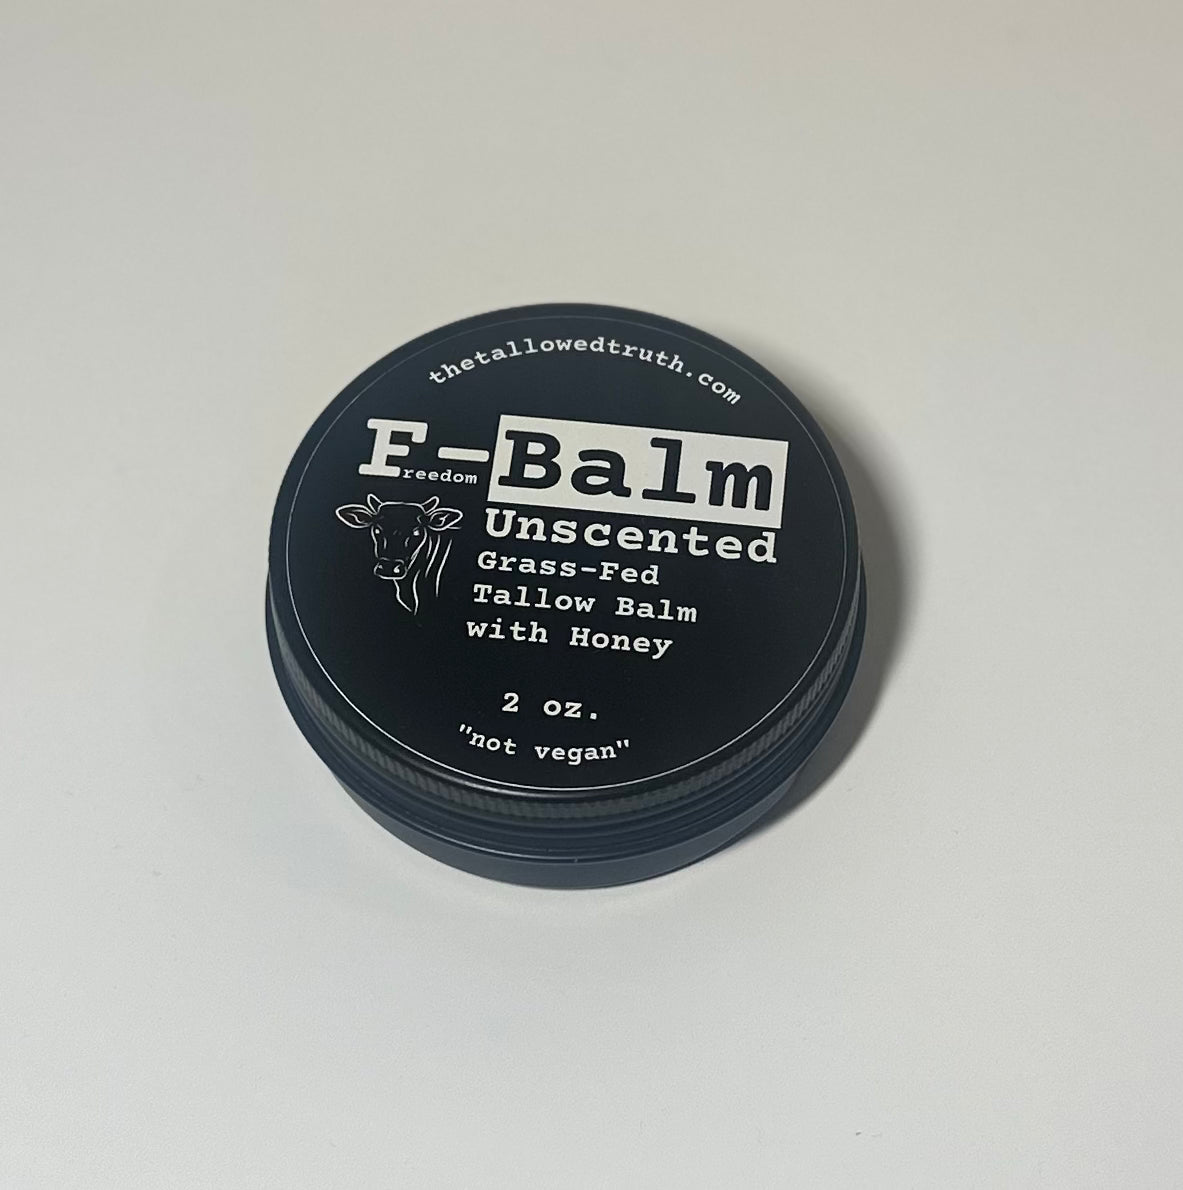 F-Balm - Anti-Aging Tallow Balm - Black Label (UNSCENTED)